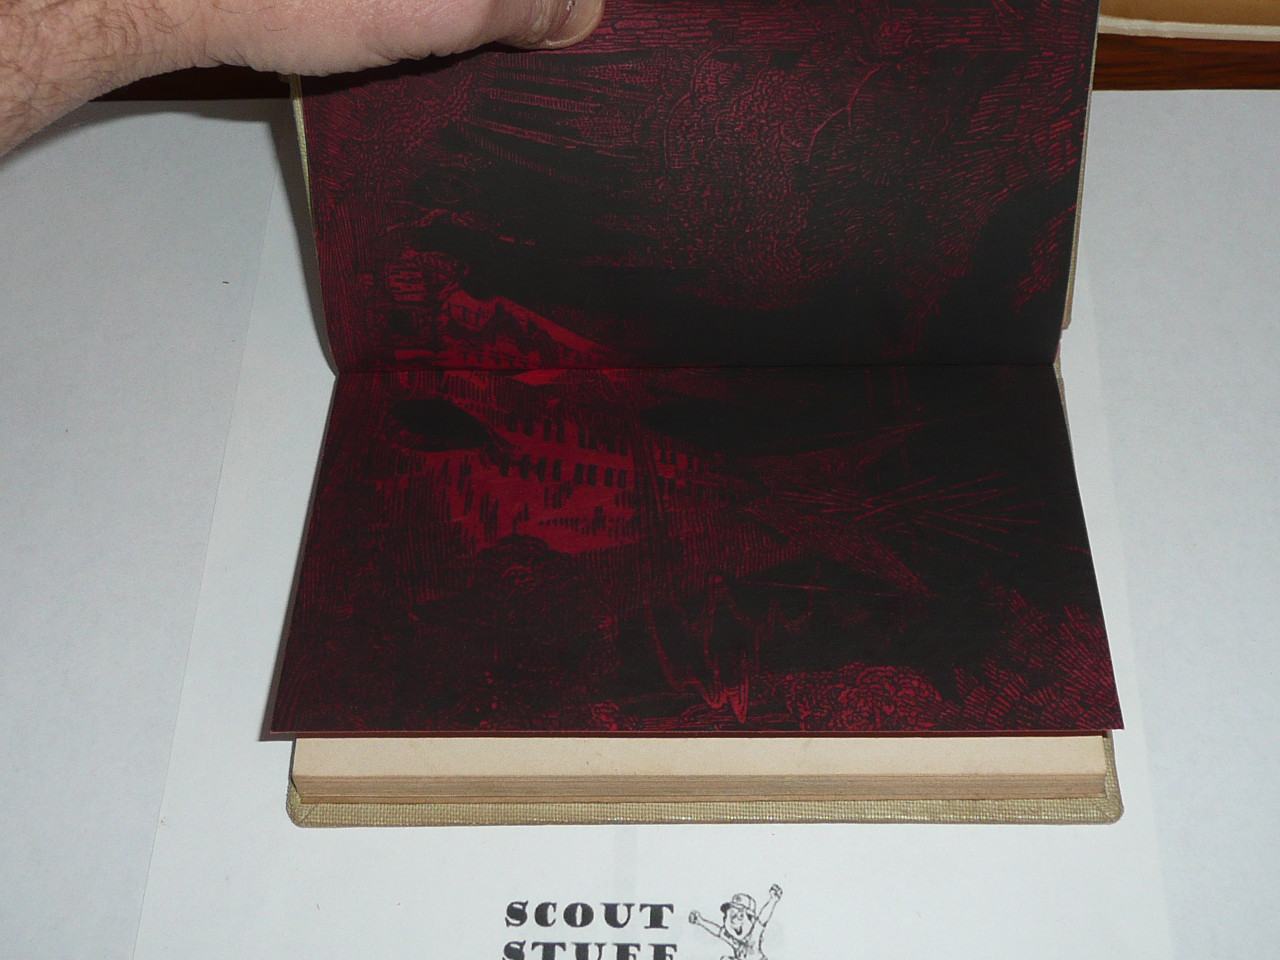 1942 Lion Cub Scout Handbook, 5-42 Printing, Library Bound with different covers